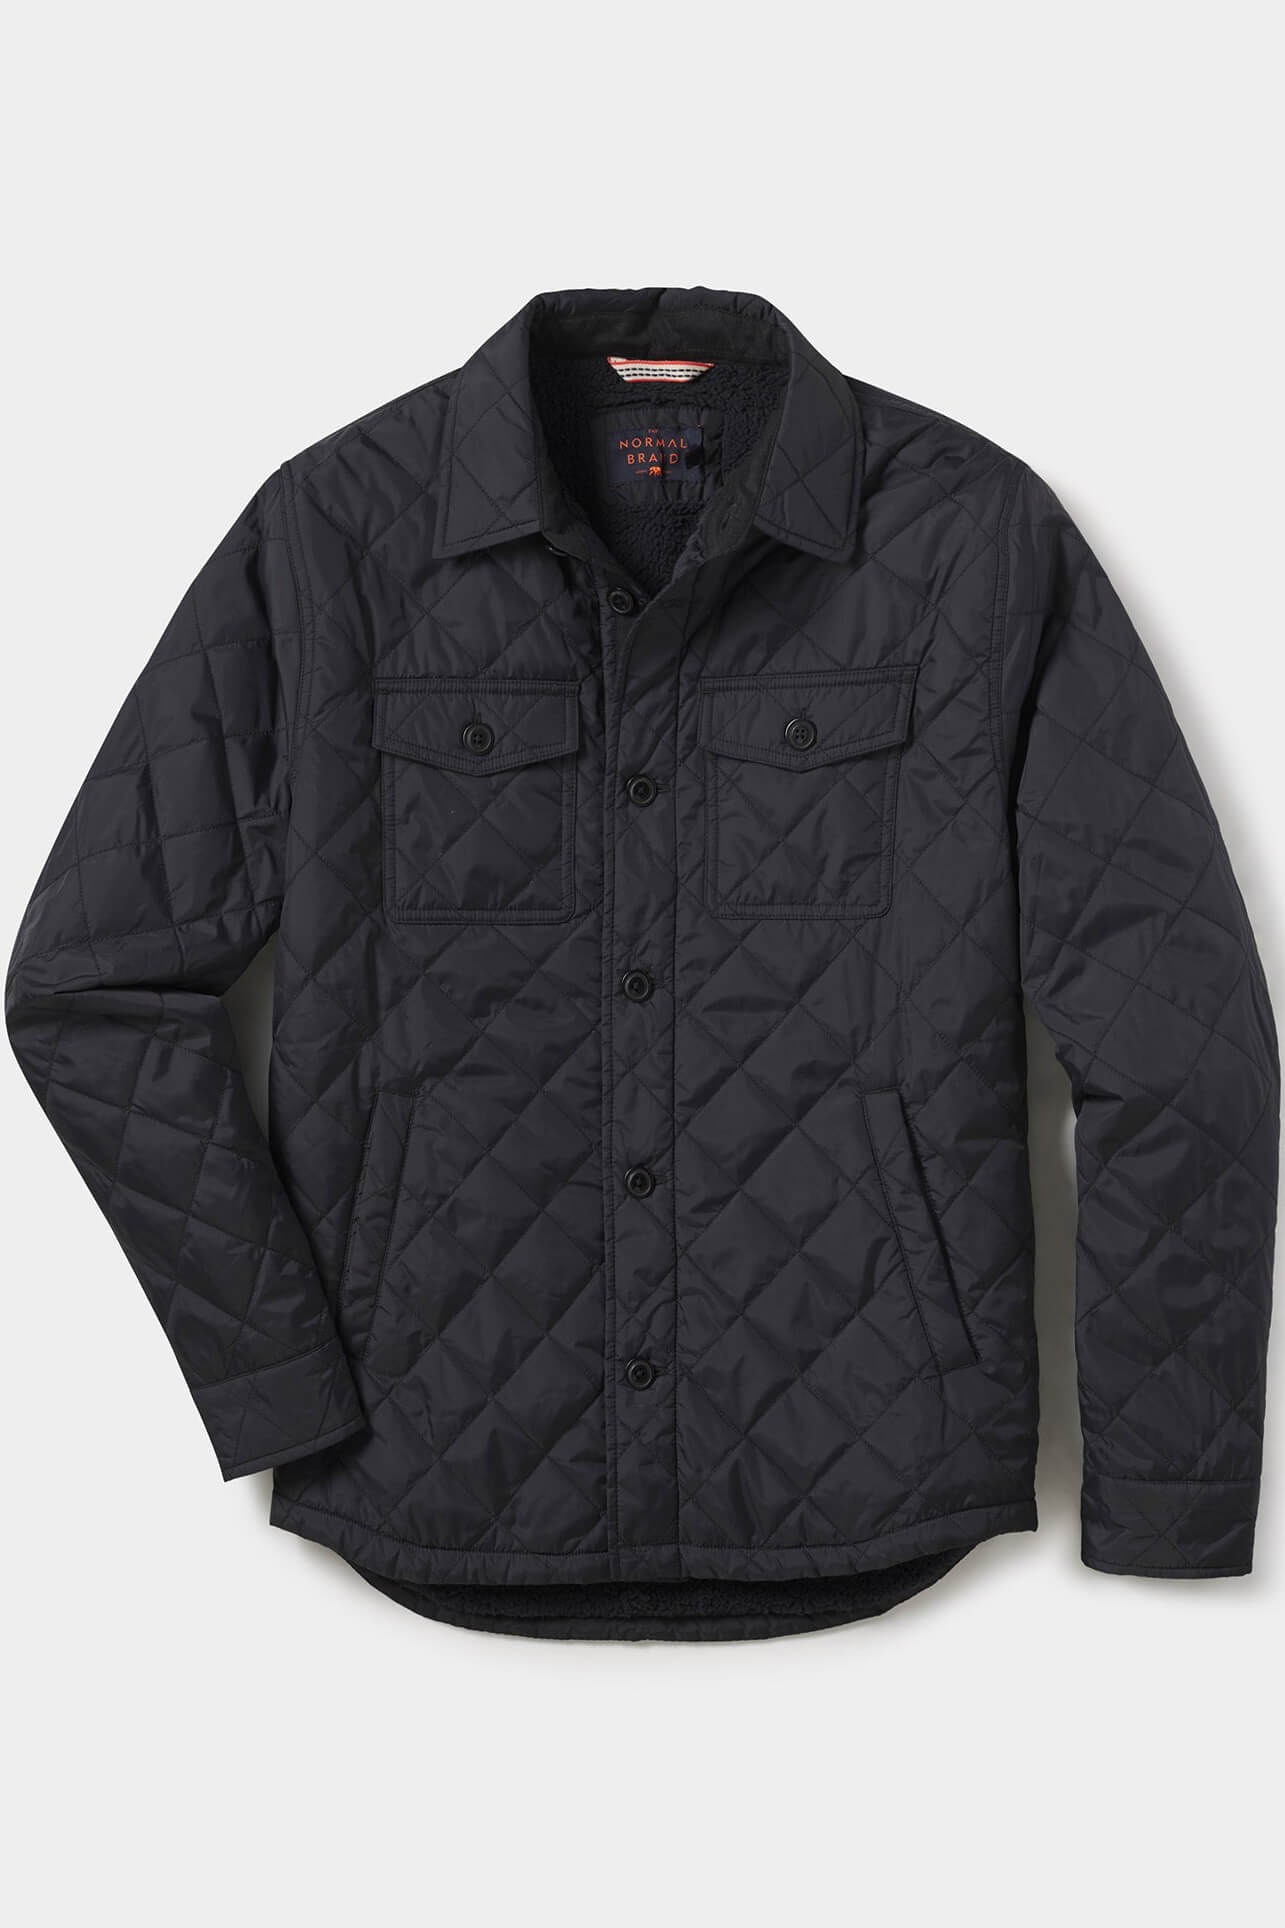 mens quilted sherpa jacket